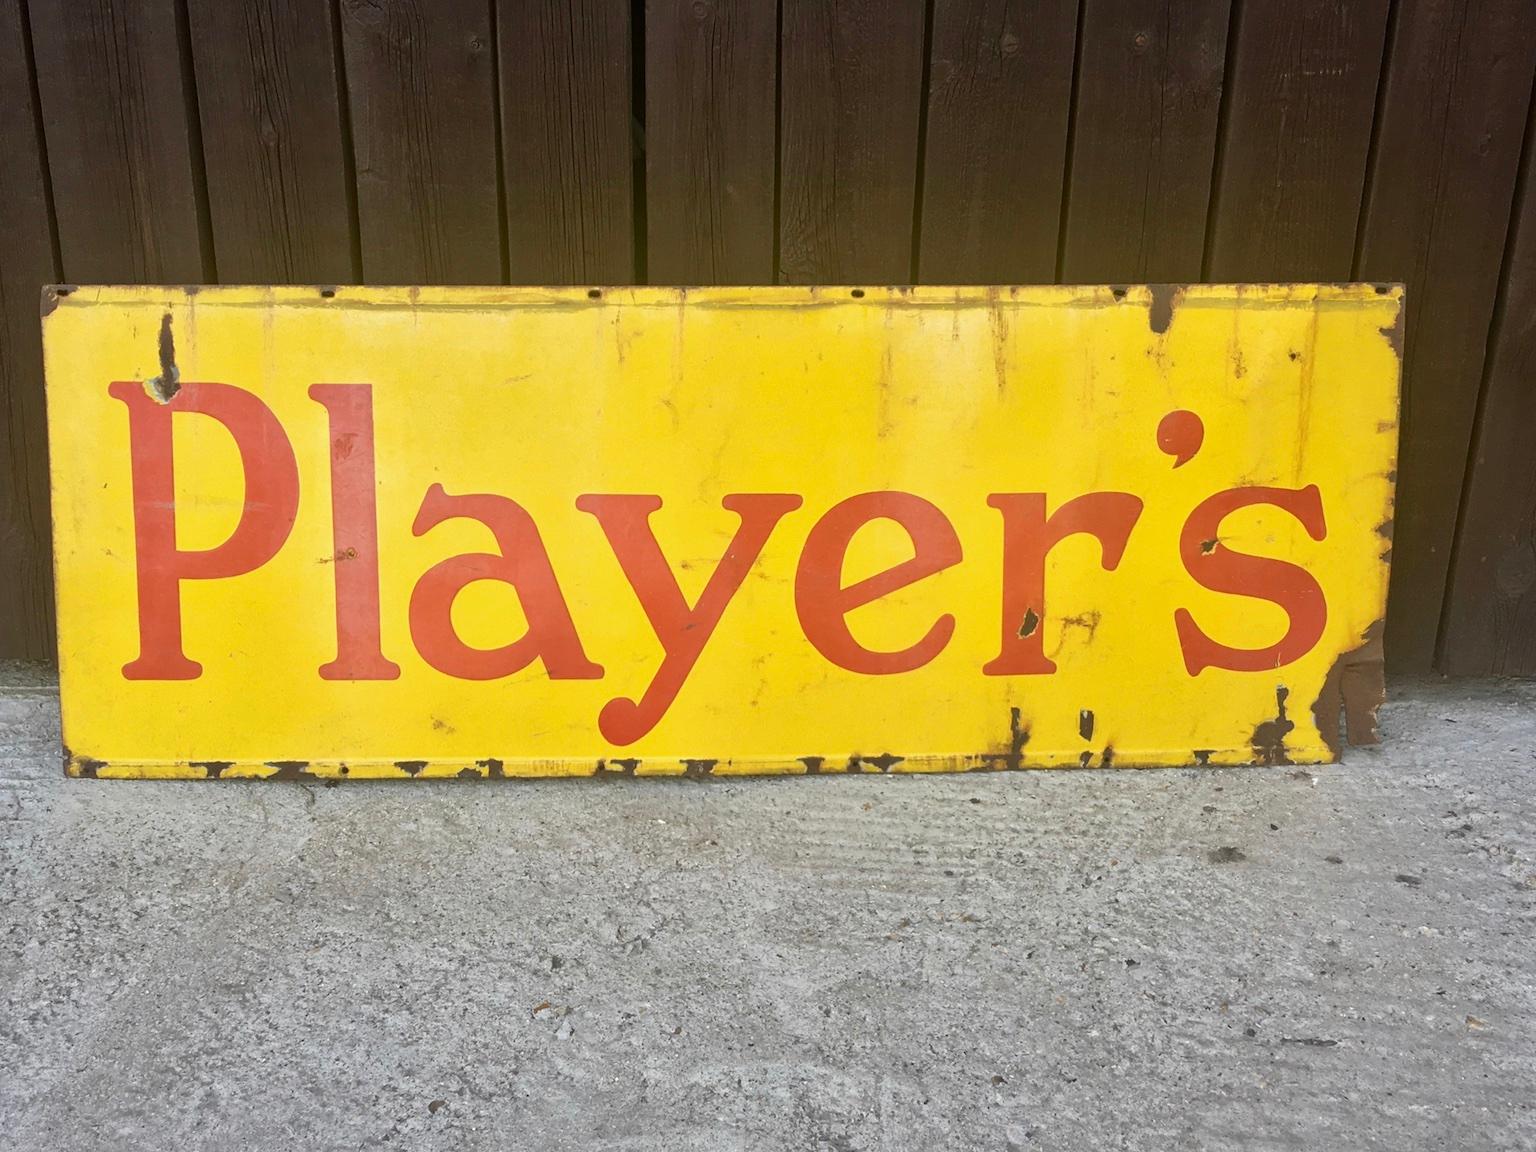 Large Enamel advertising sign for Player’s tobacco, 1950
Vintage decorative 'Player's' Tobacco enamel advertising sign. Dating from around early 1950s, this is a great example, a rare sign that doesn't come up on the market very often. 
The colours,